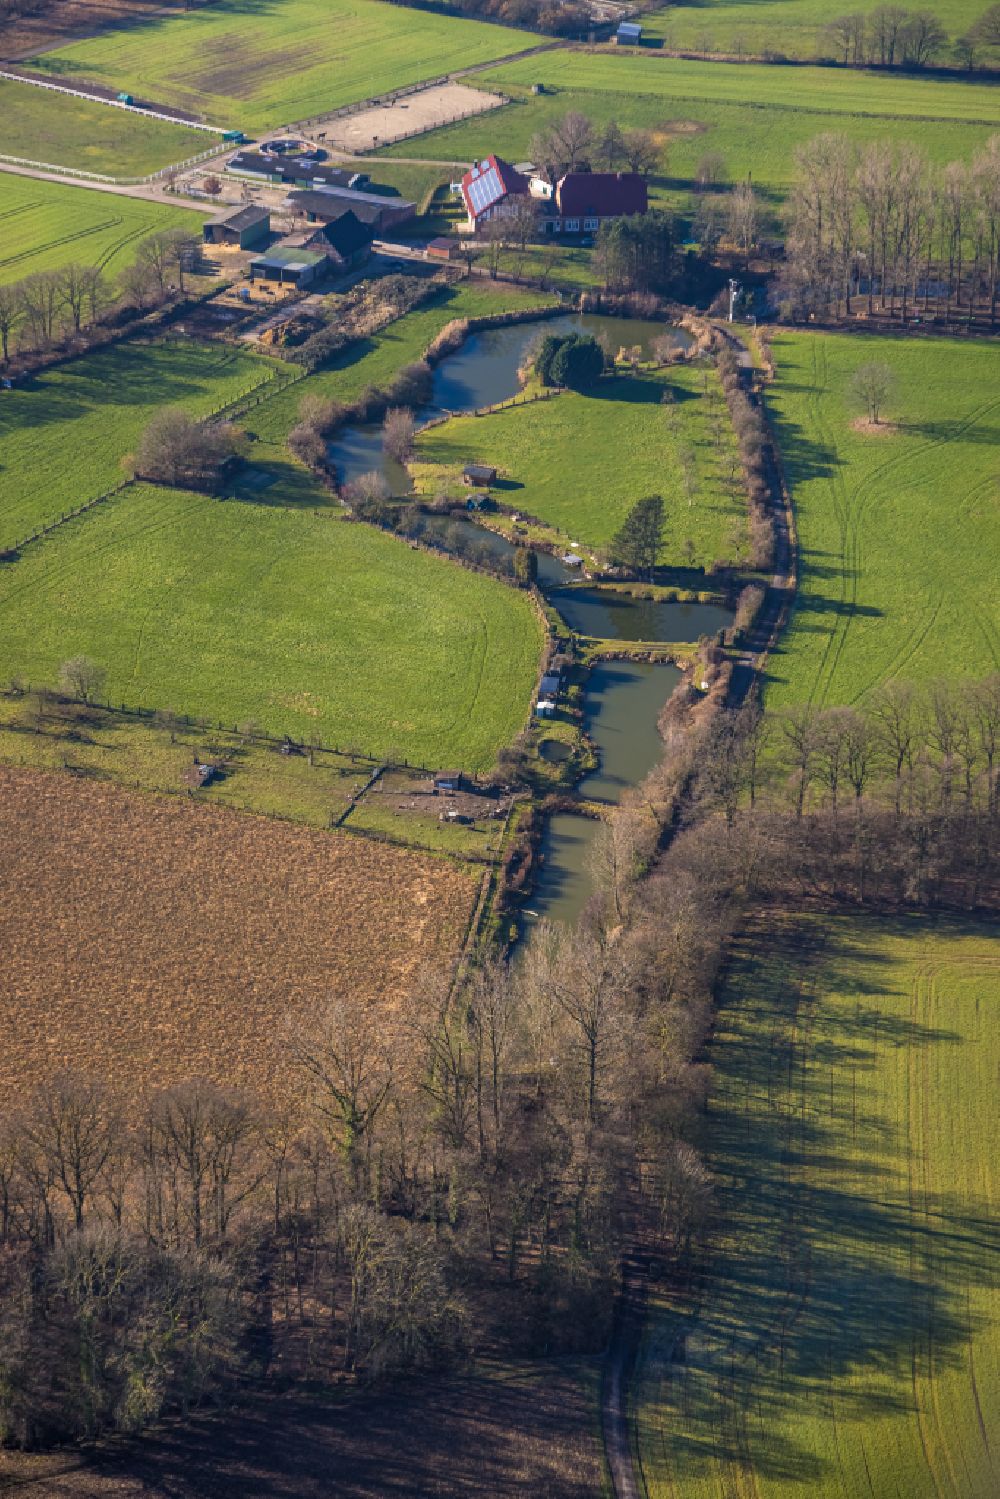 Bork from above - Riparian zones on the course of the river Lippe Altarm in Bork in the state North Rhine-Westphalia, Germany